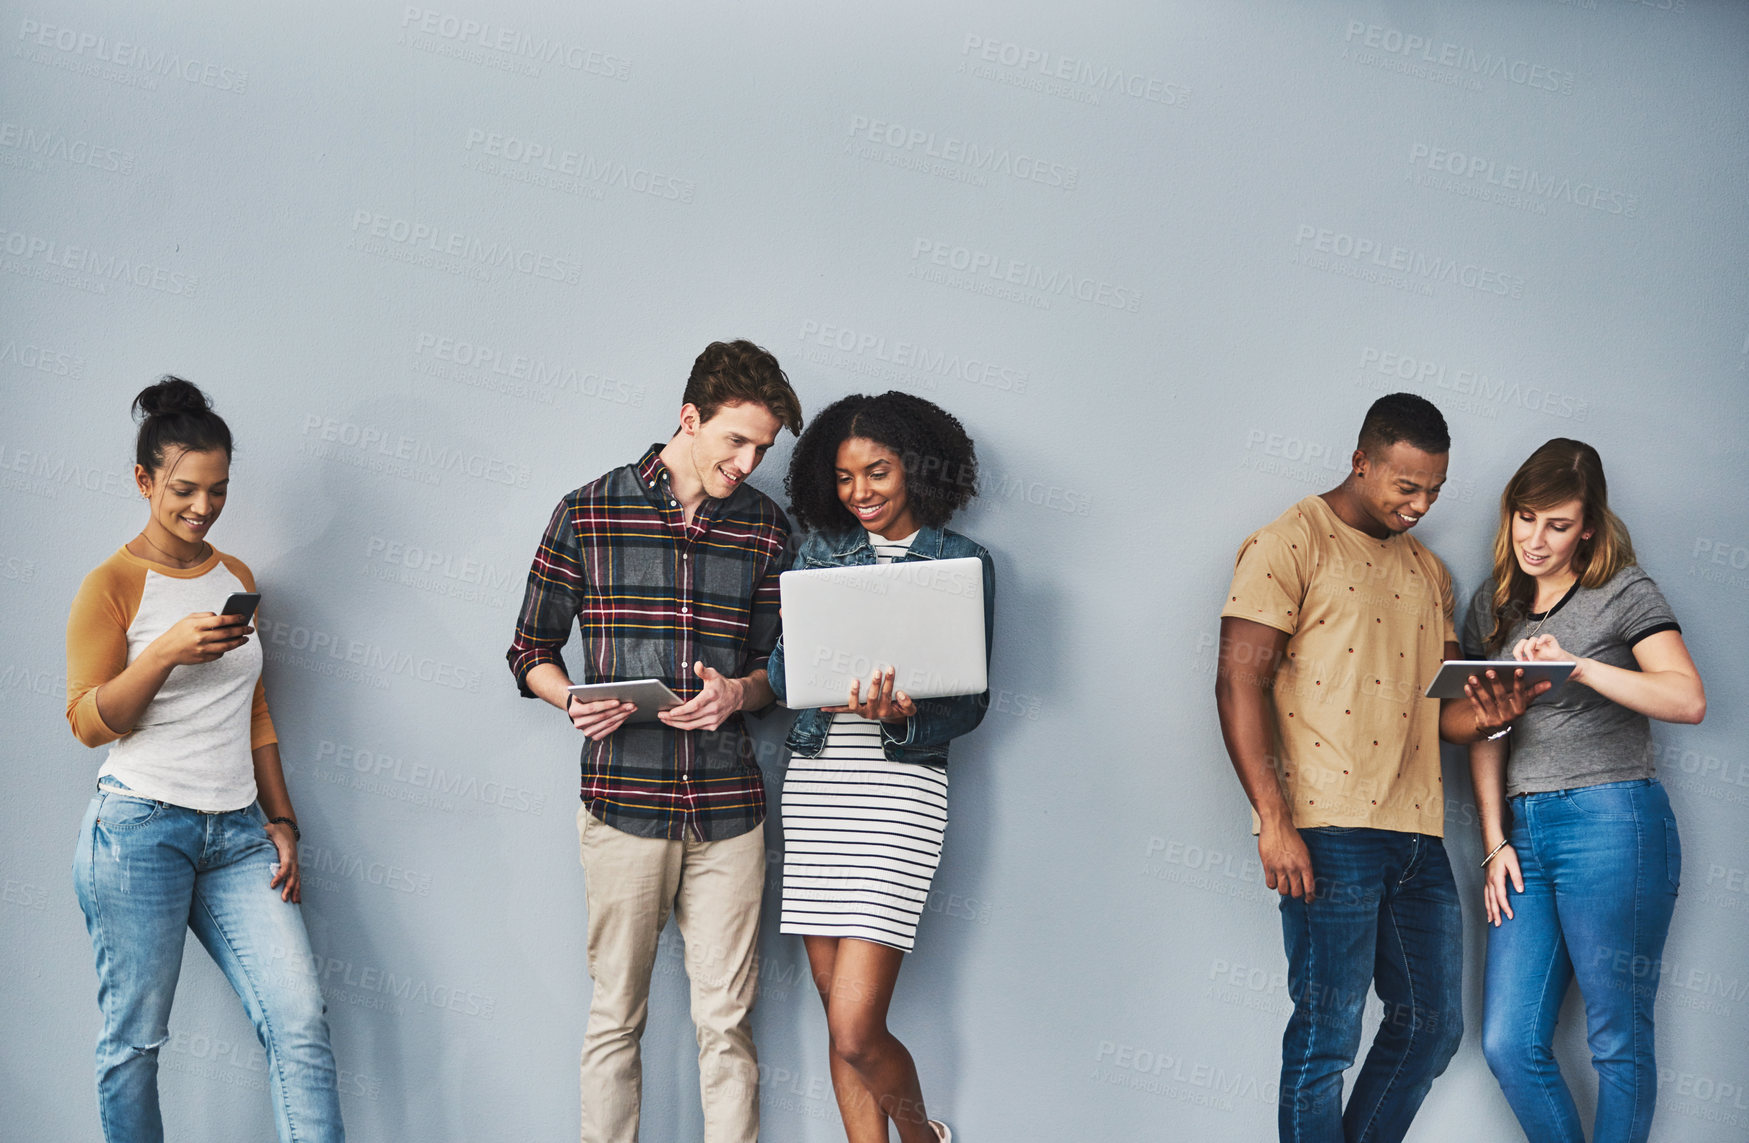 Buy stock photo Studio shot of a group of young people using wireless technology against a gray background